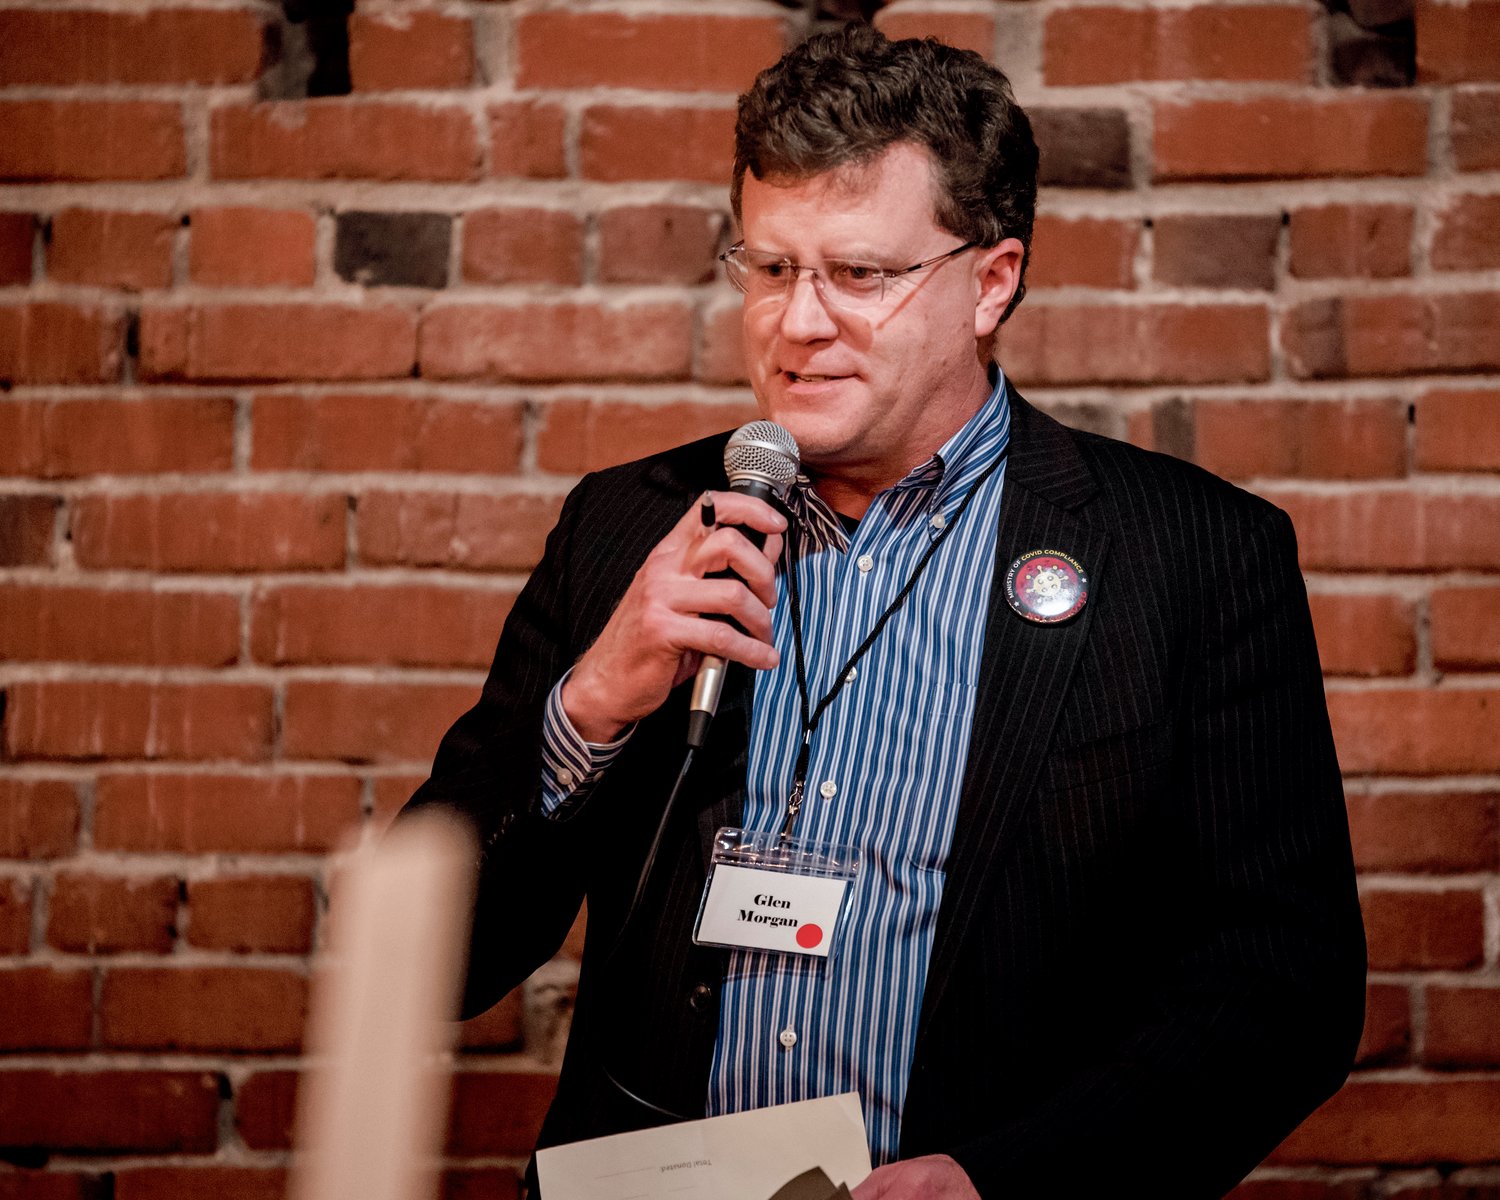 Glen Morgan uses a microphone to address attendees of the Lincoln Day Dinner in Chehalis in this file photo.